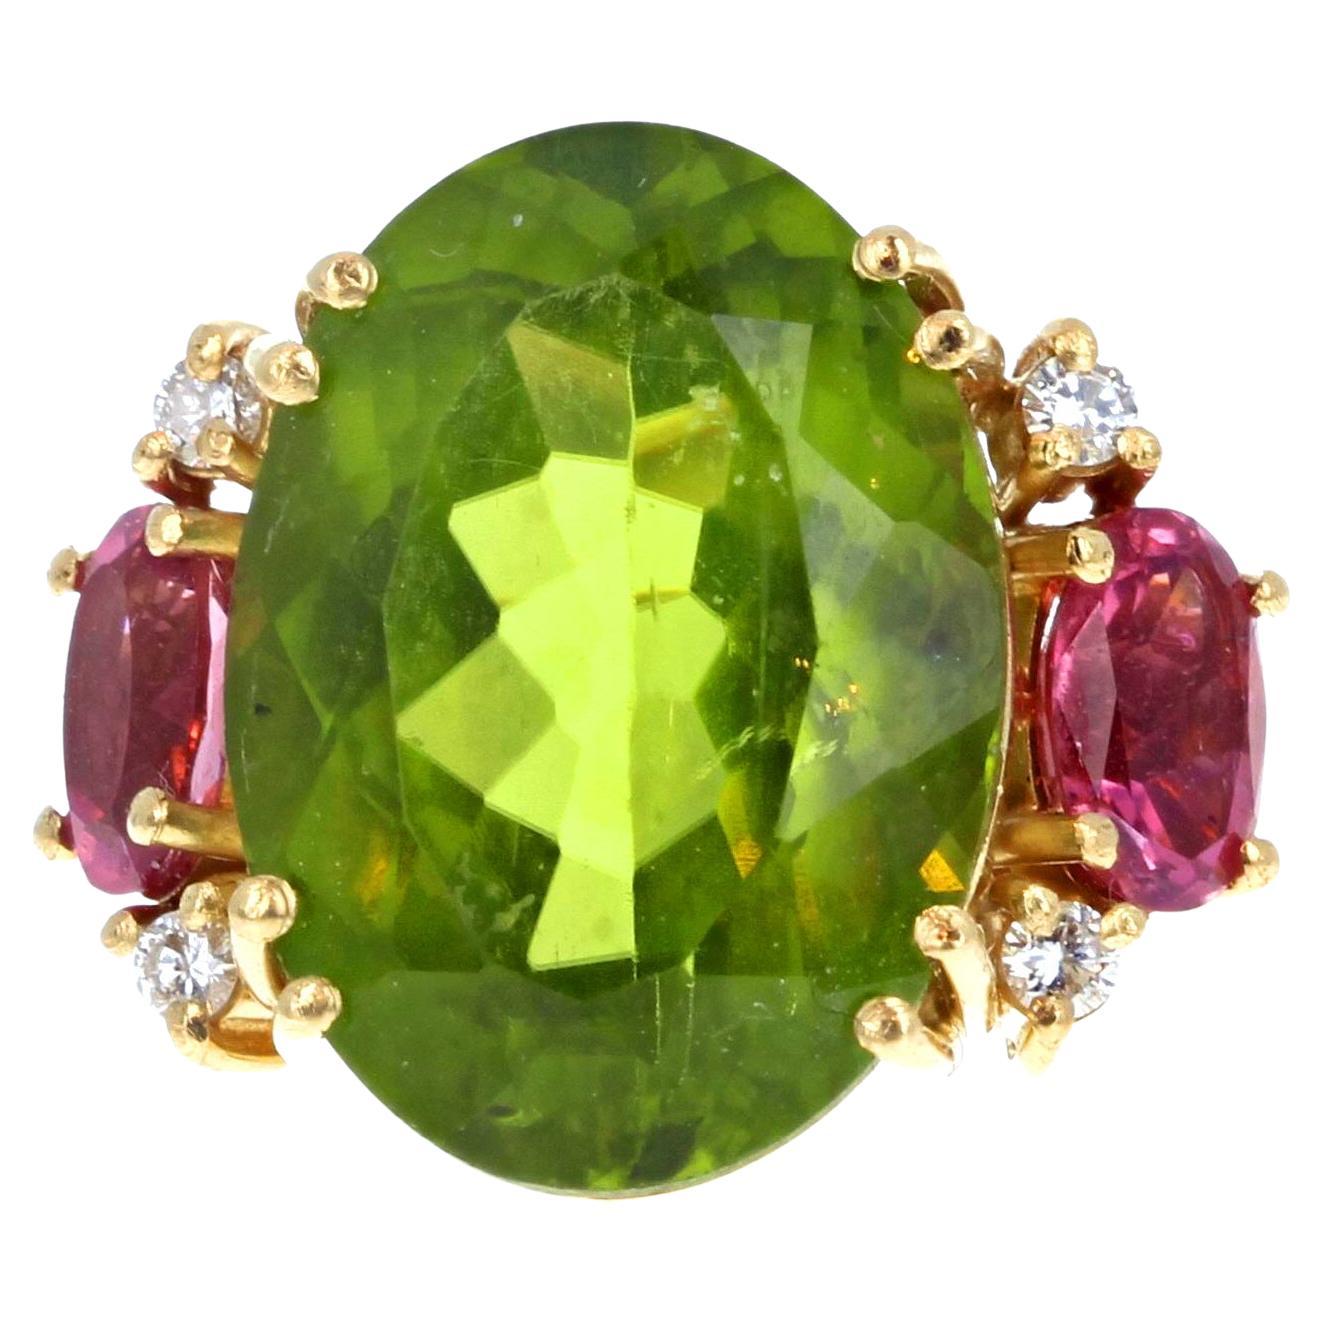 This 18Kt yellow gold ring holds a 14 carat natural clear green Tourmaline enhanced with 4 tiny white sparkling glittering little Diamonds and Pink Tourmalines.  The main Tourmaline gemstone is 18mm x 13.2mm and is intensely green.  The Pink